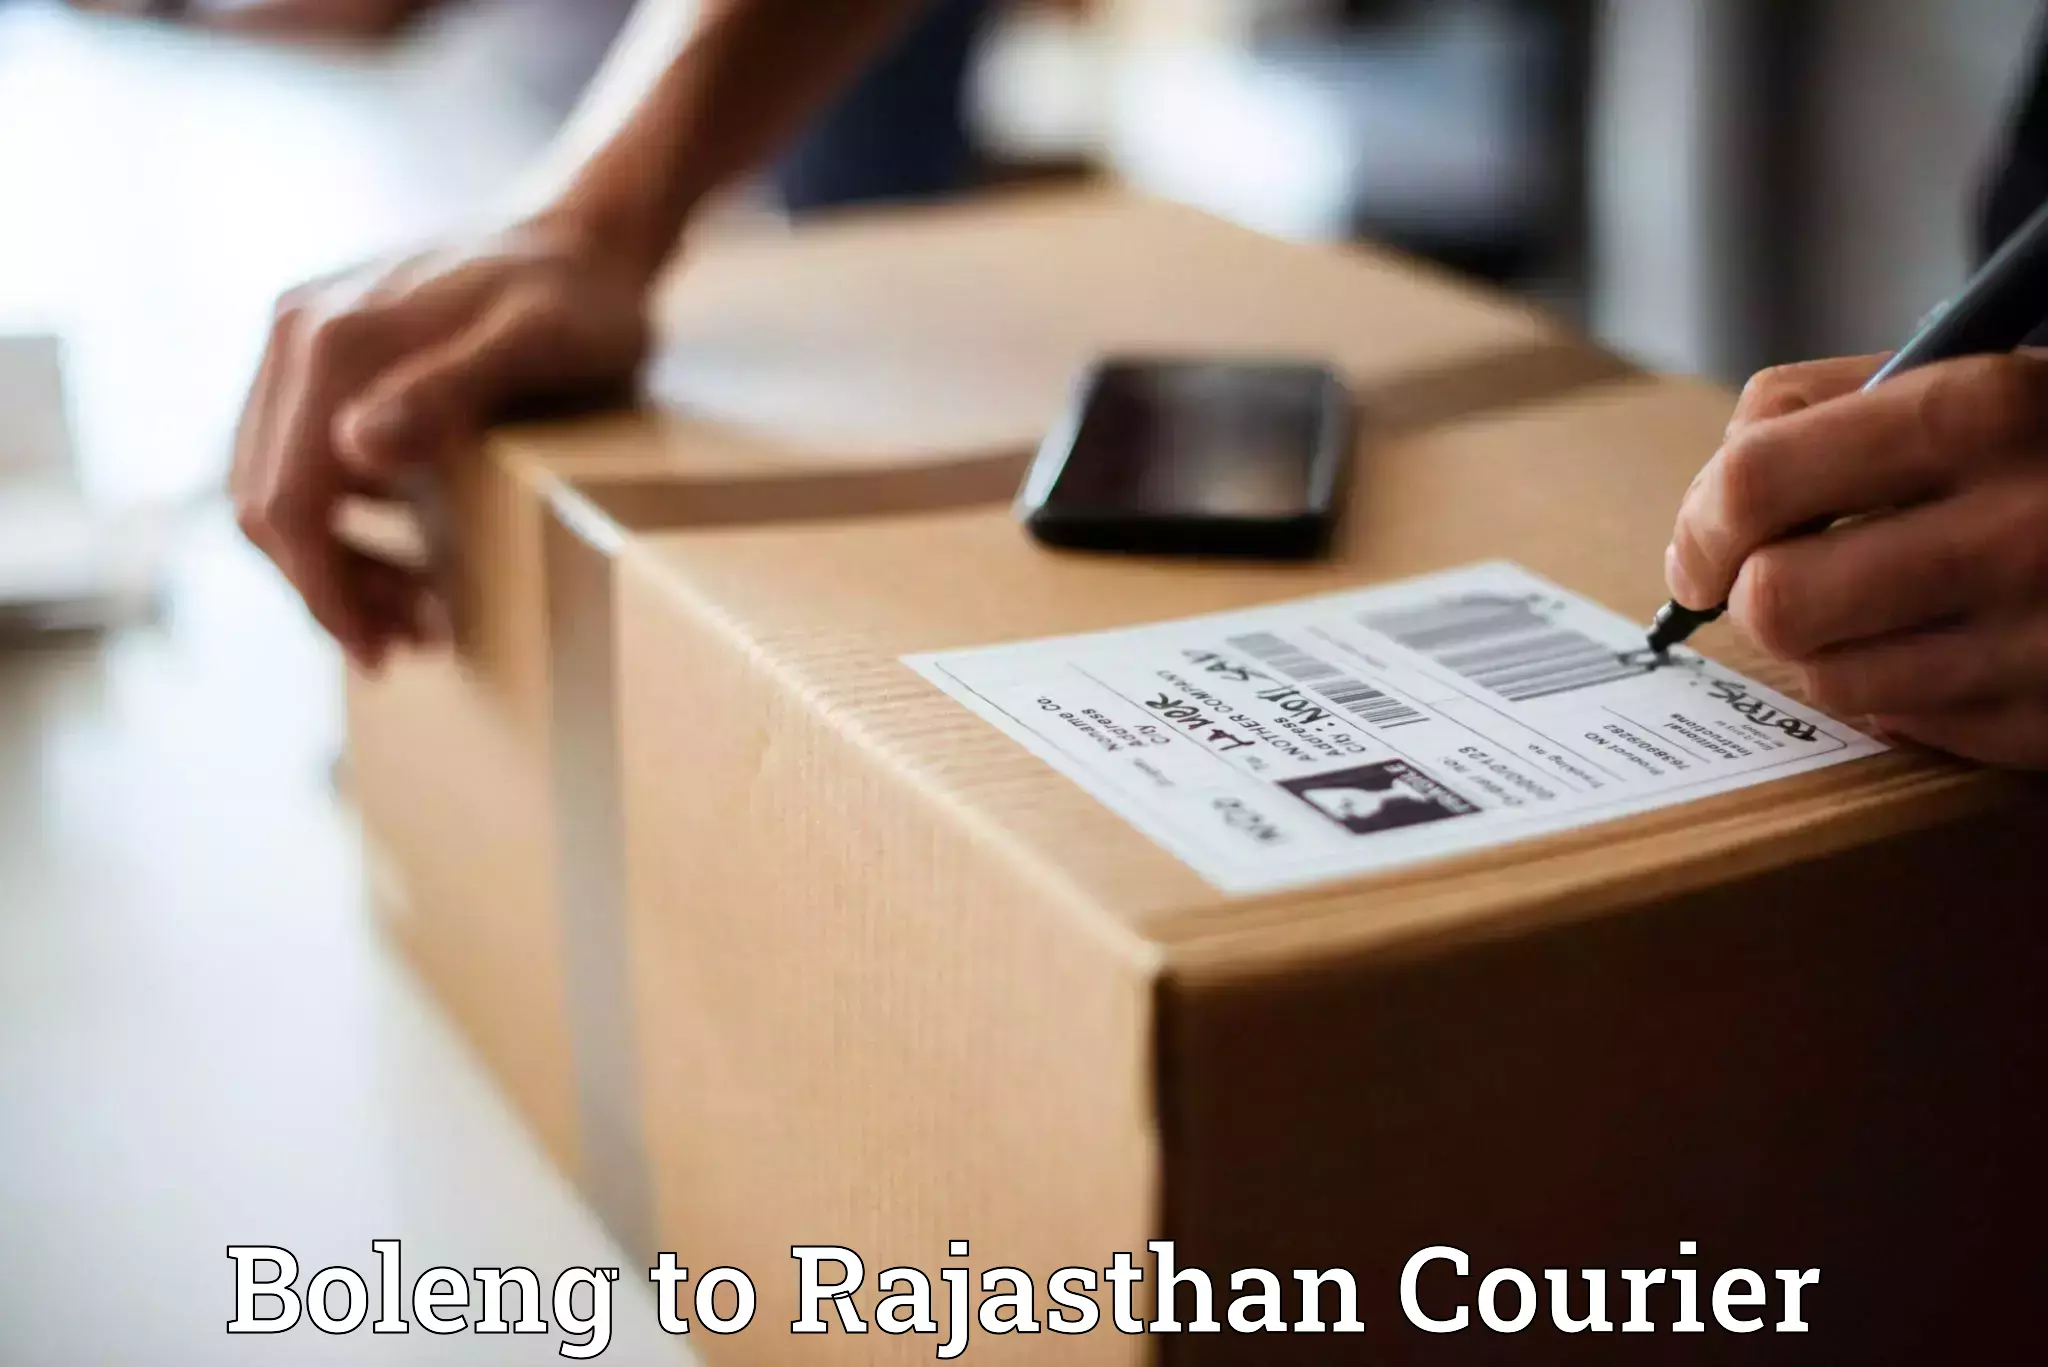 Express package delivery in Boleng to Rajasthan